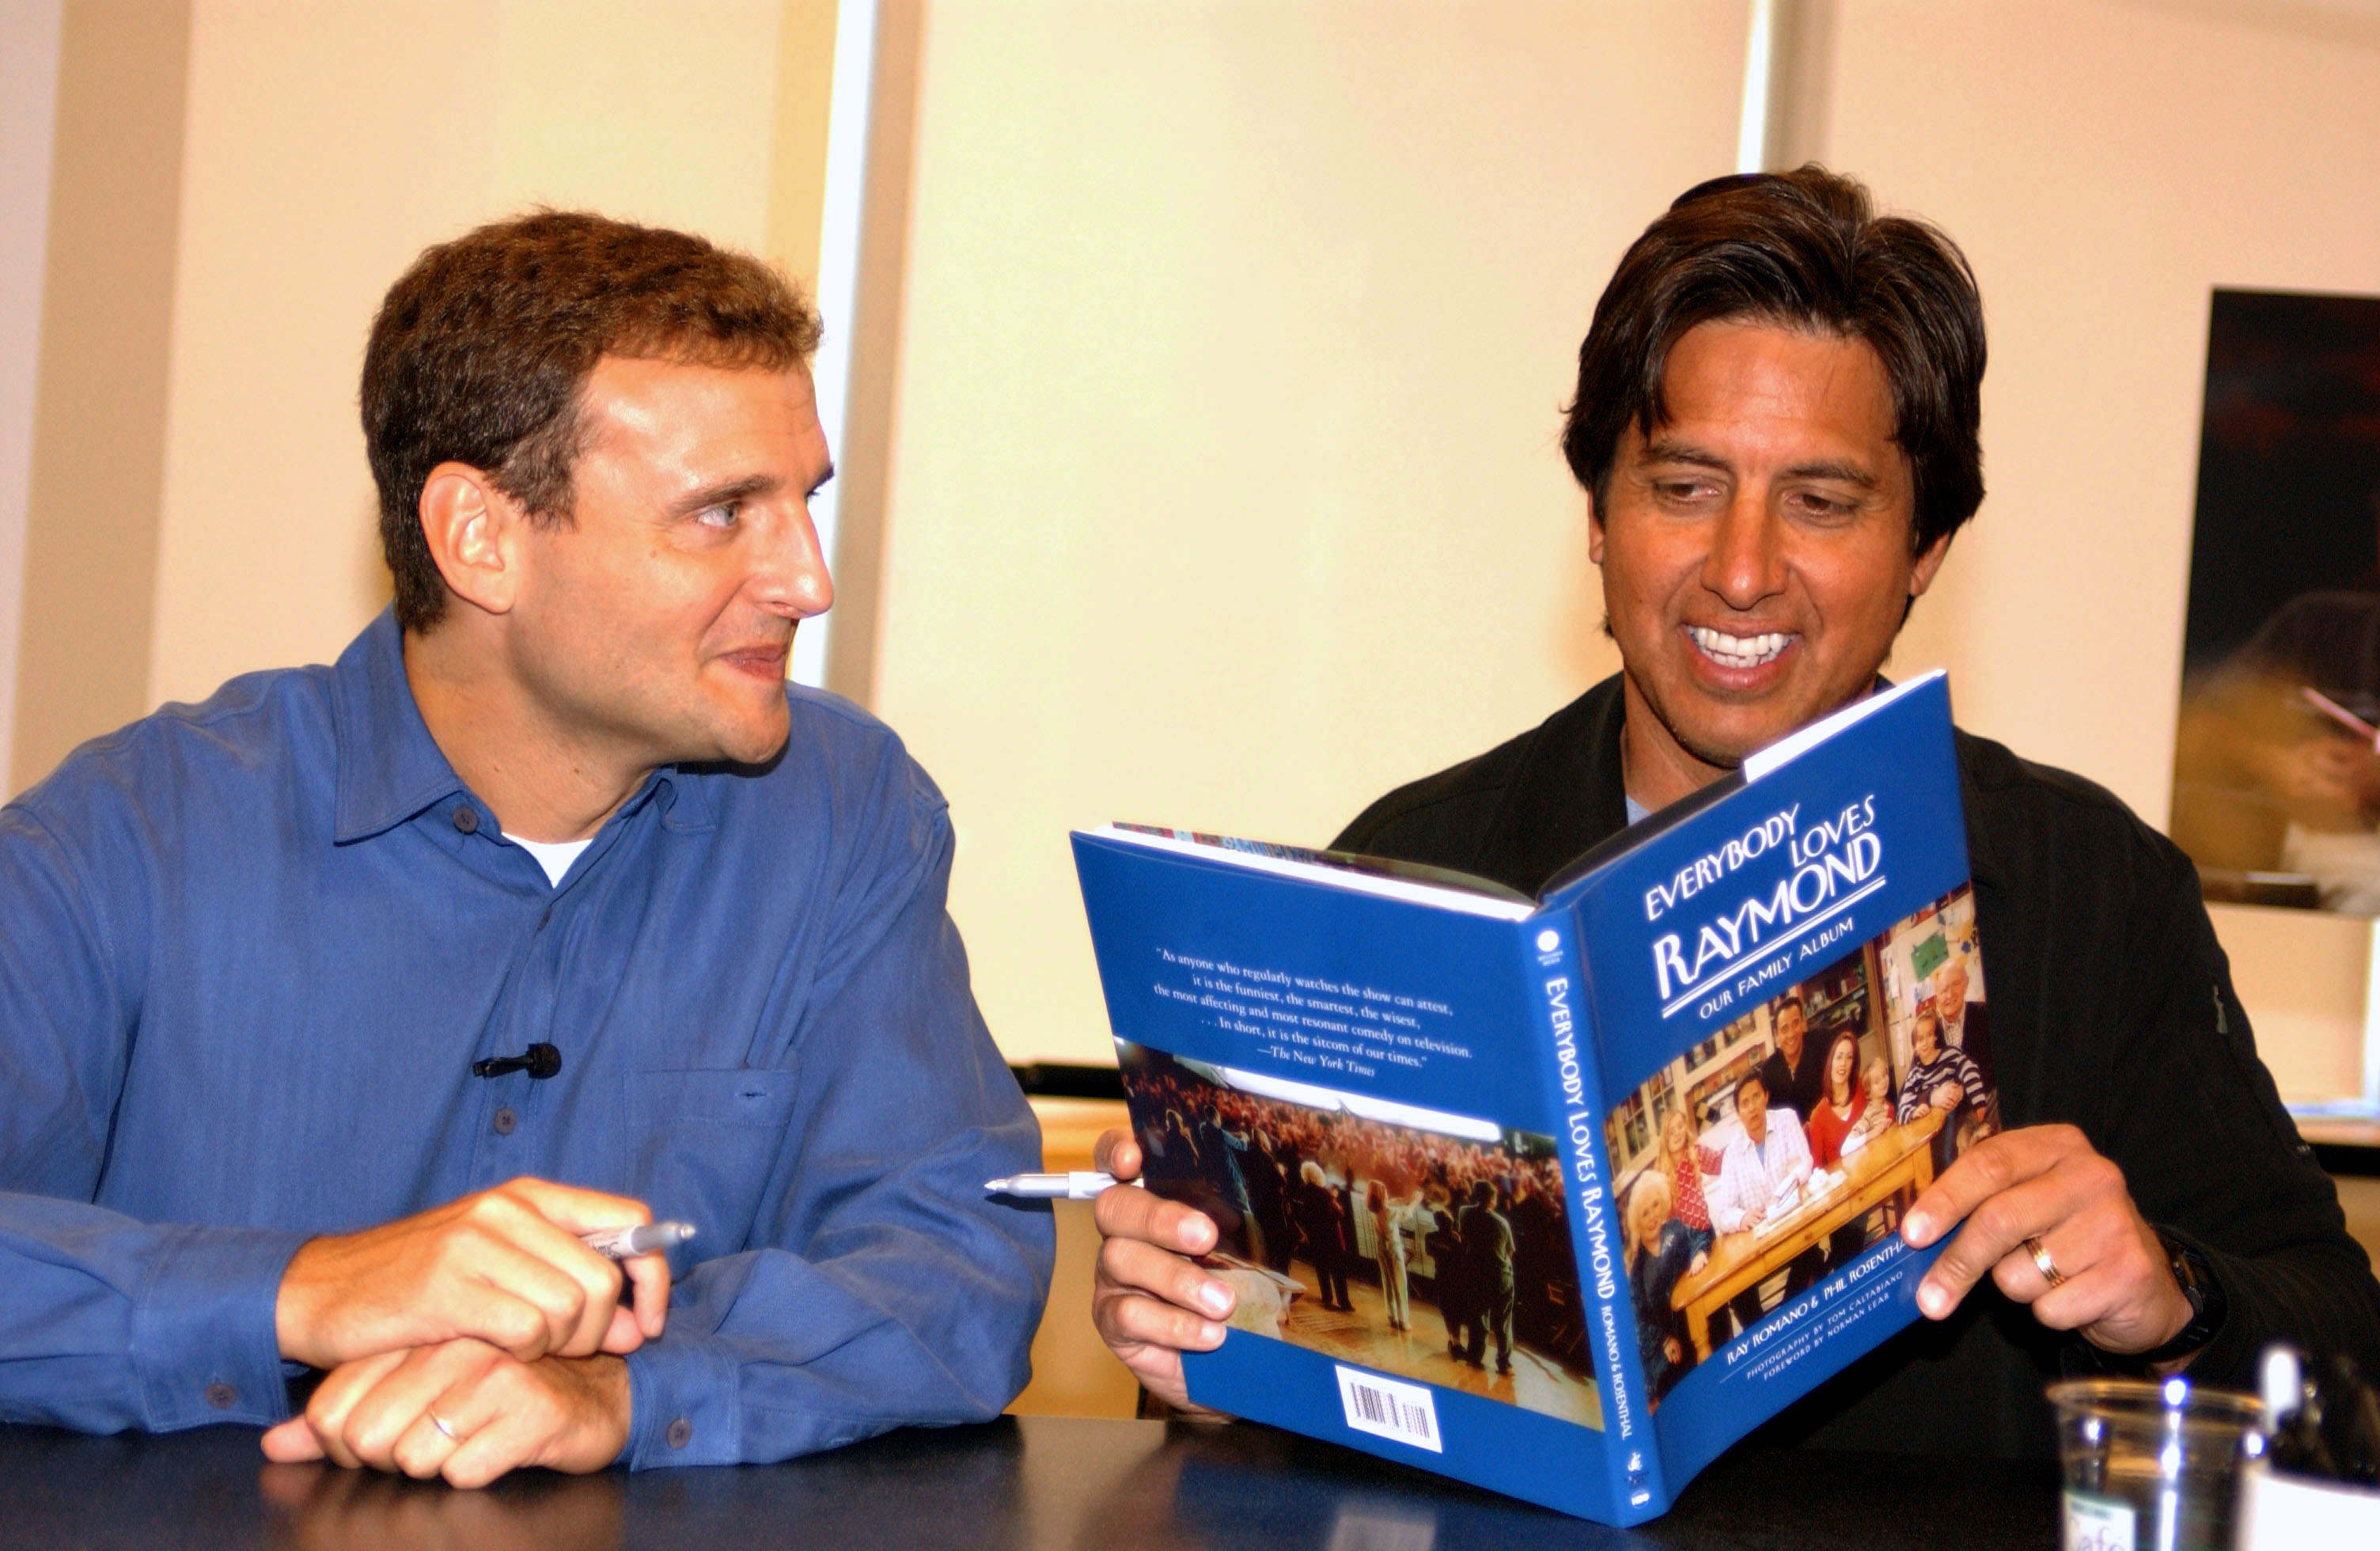 Phil Rosenthal,, left, with Ray Romano